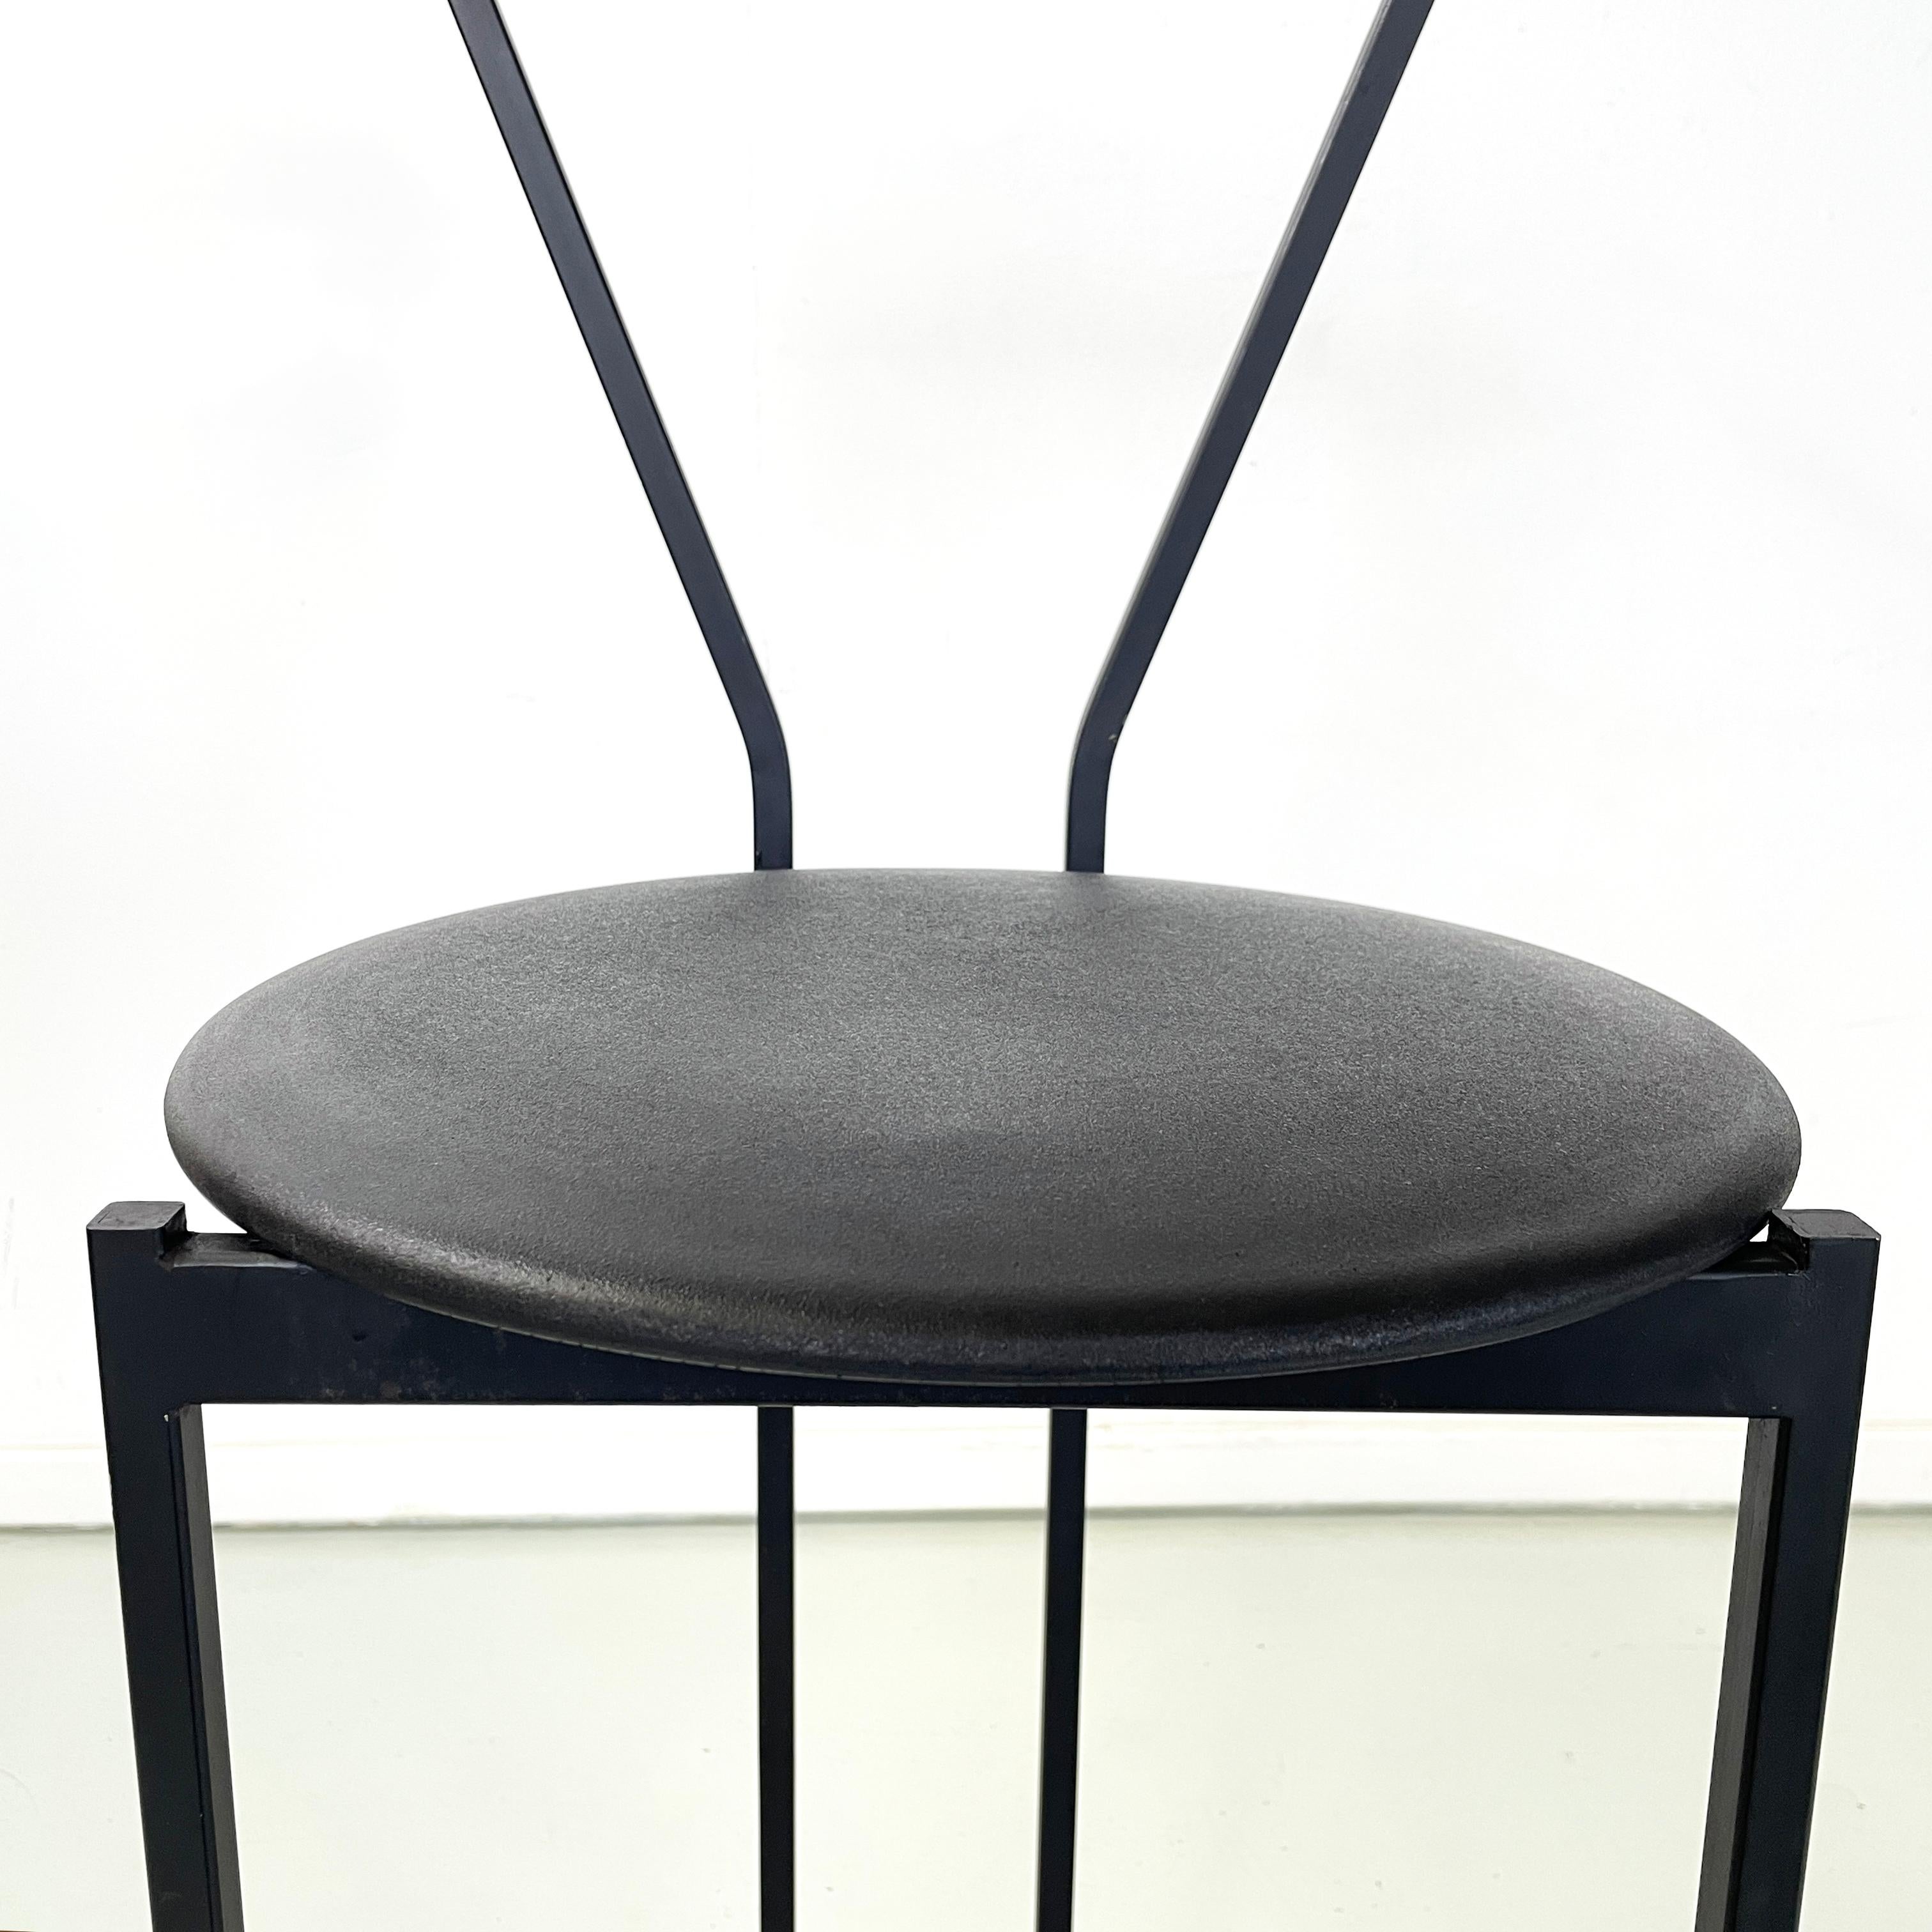 Italian modern high stool in black metal and rubber, 1980s For Sale 4